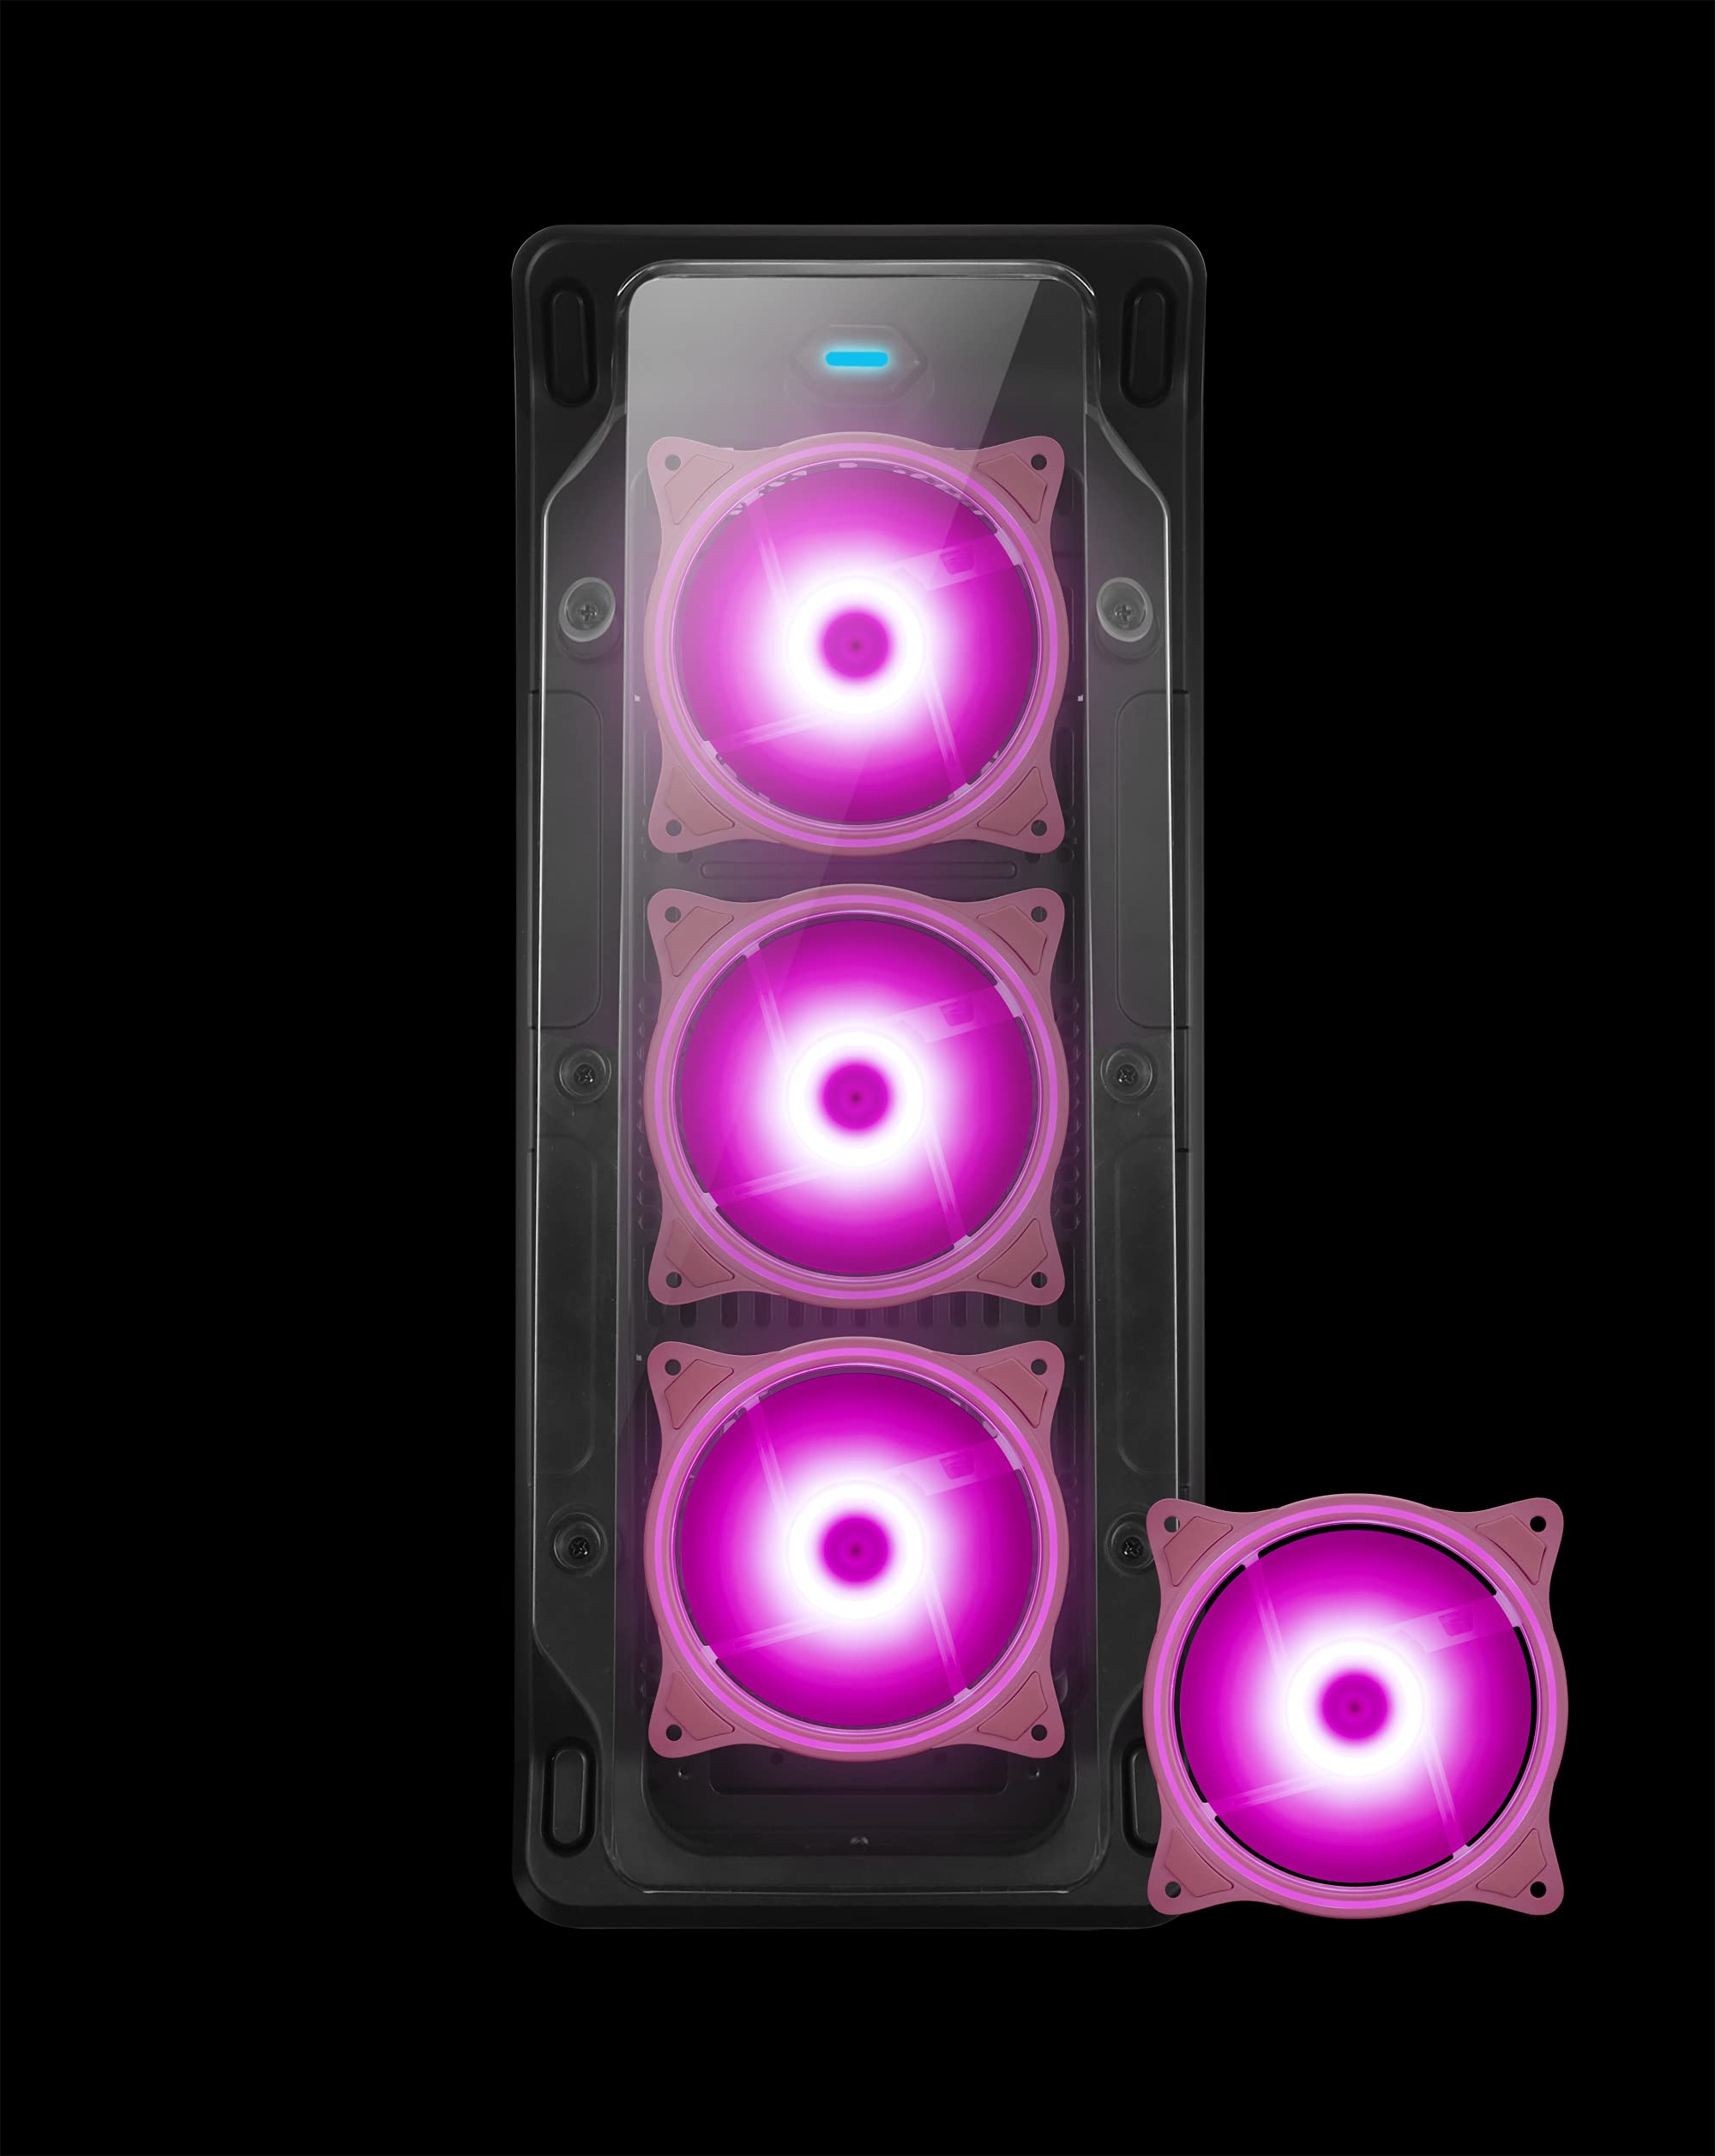 120mm Computer PC Cooling Fan Pink LED Game Case Cooler Fan Quiet 12V Computer PC Fan with Triple Light Loop 3-Pack